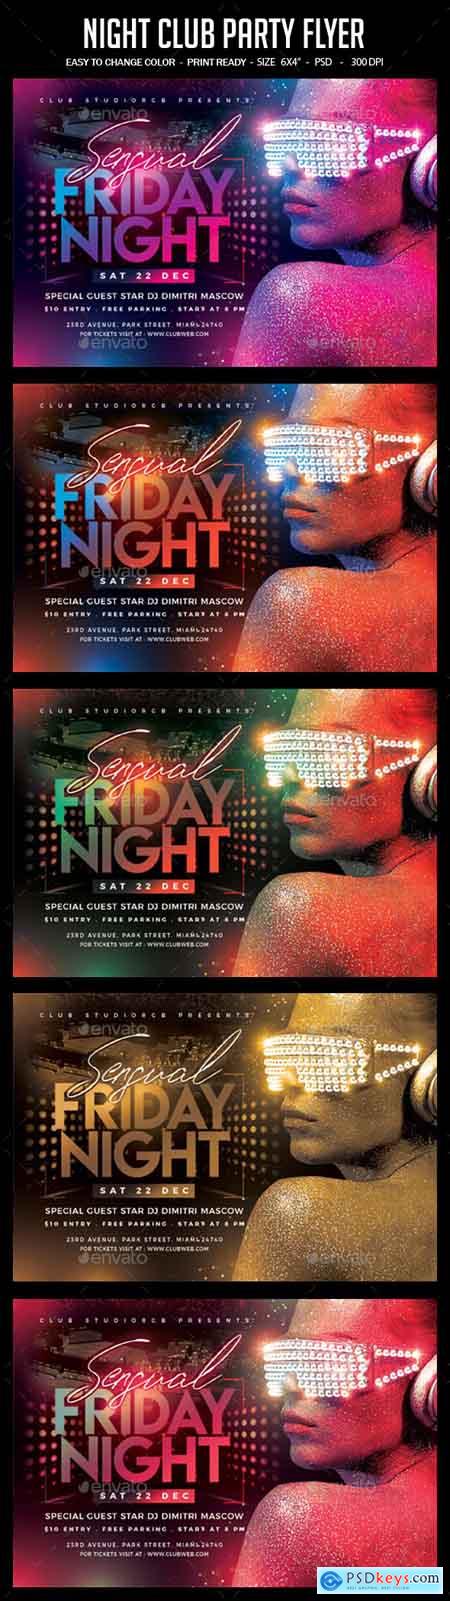 Graphicriver Night Club Party Flyer